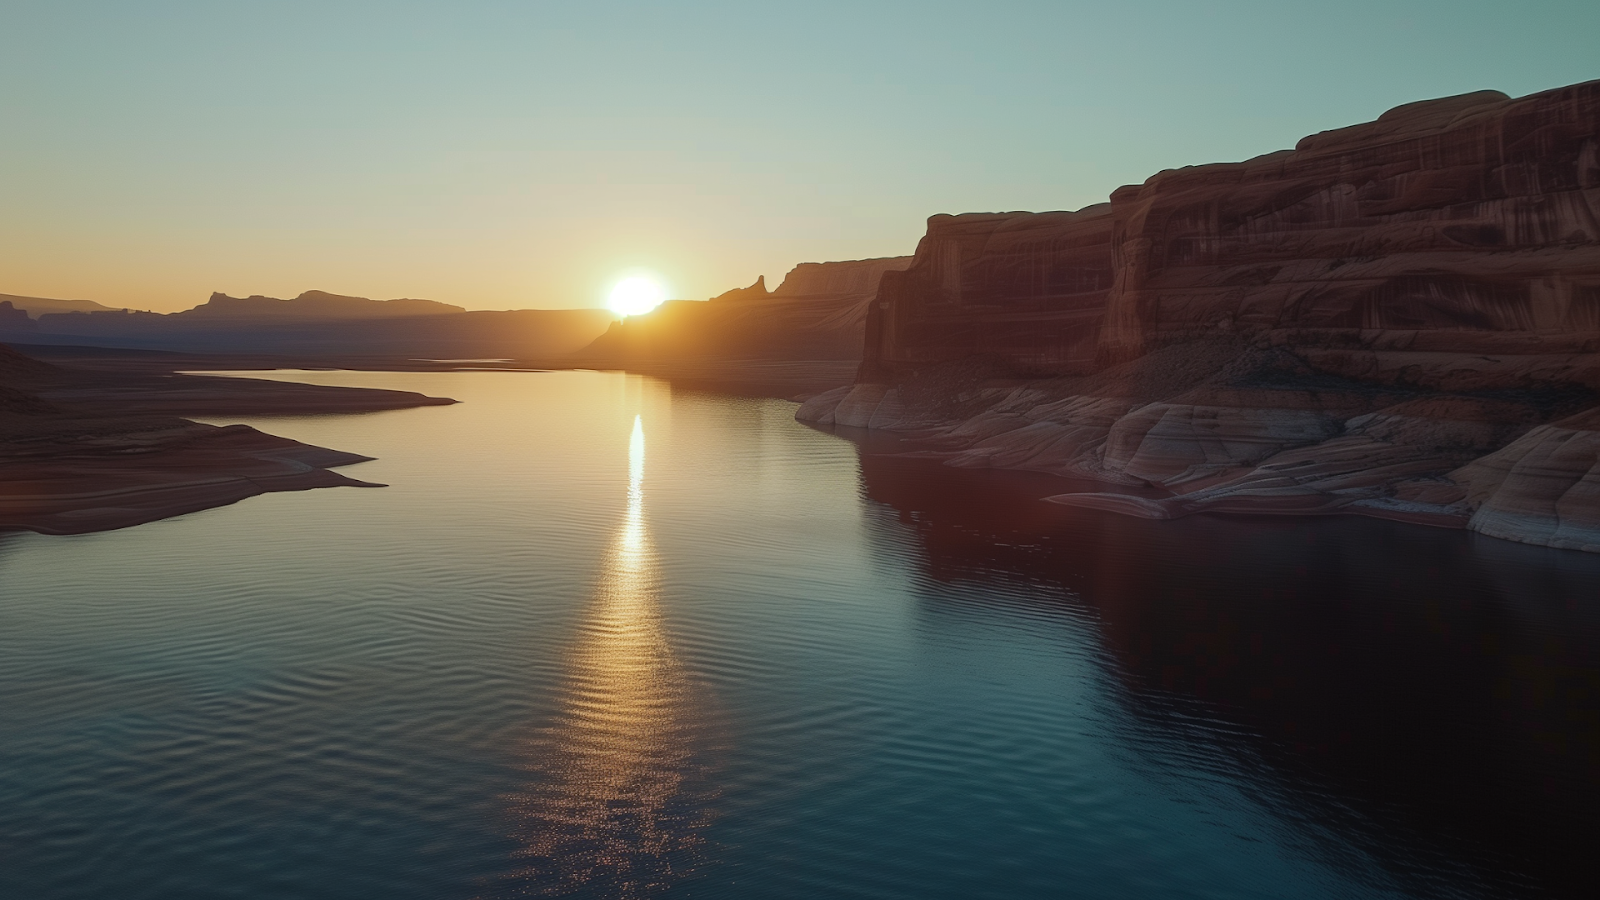 Sunrise at Lake Powell, with sunlight casting a warm glow on red rock canyons and the tranquil lake.